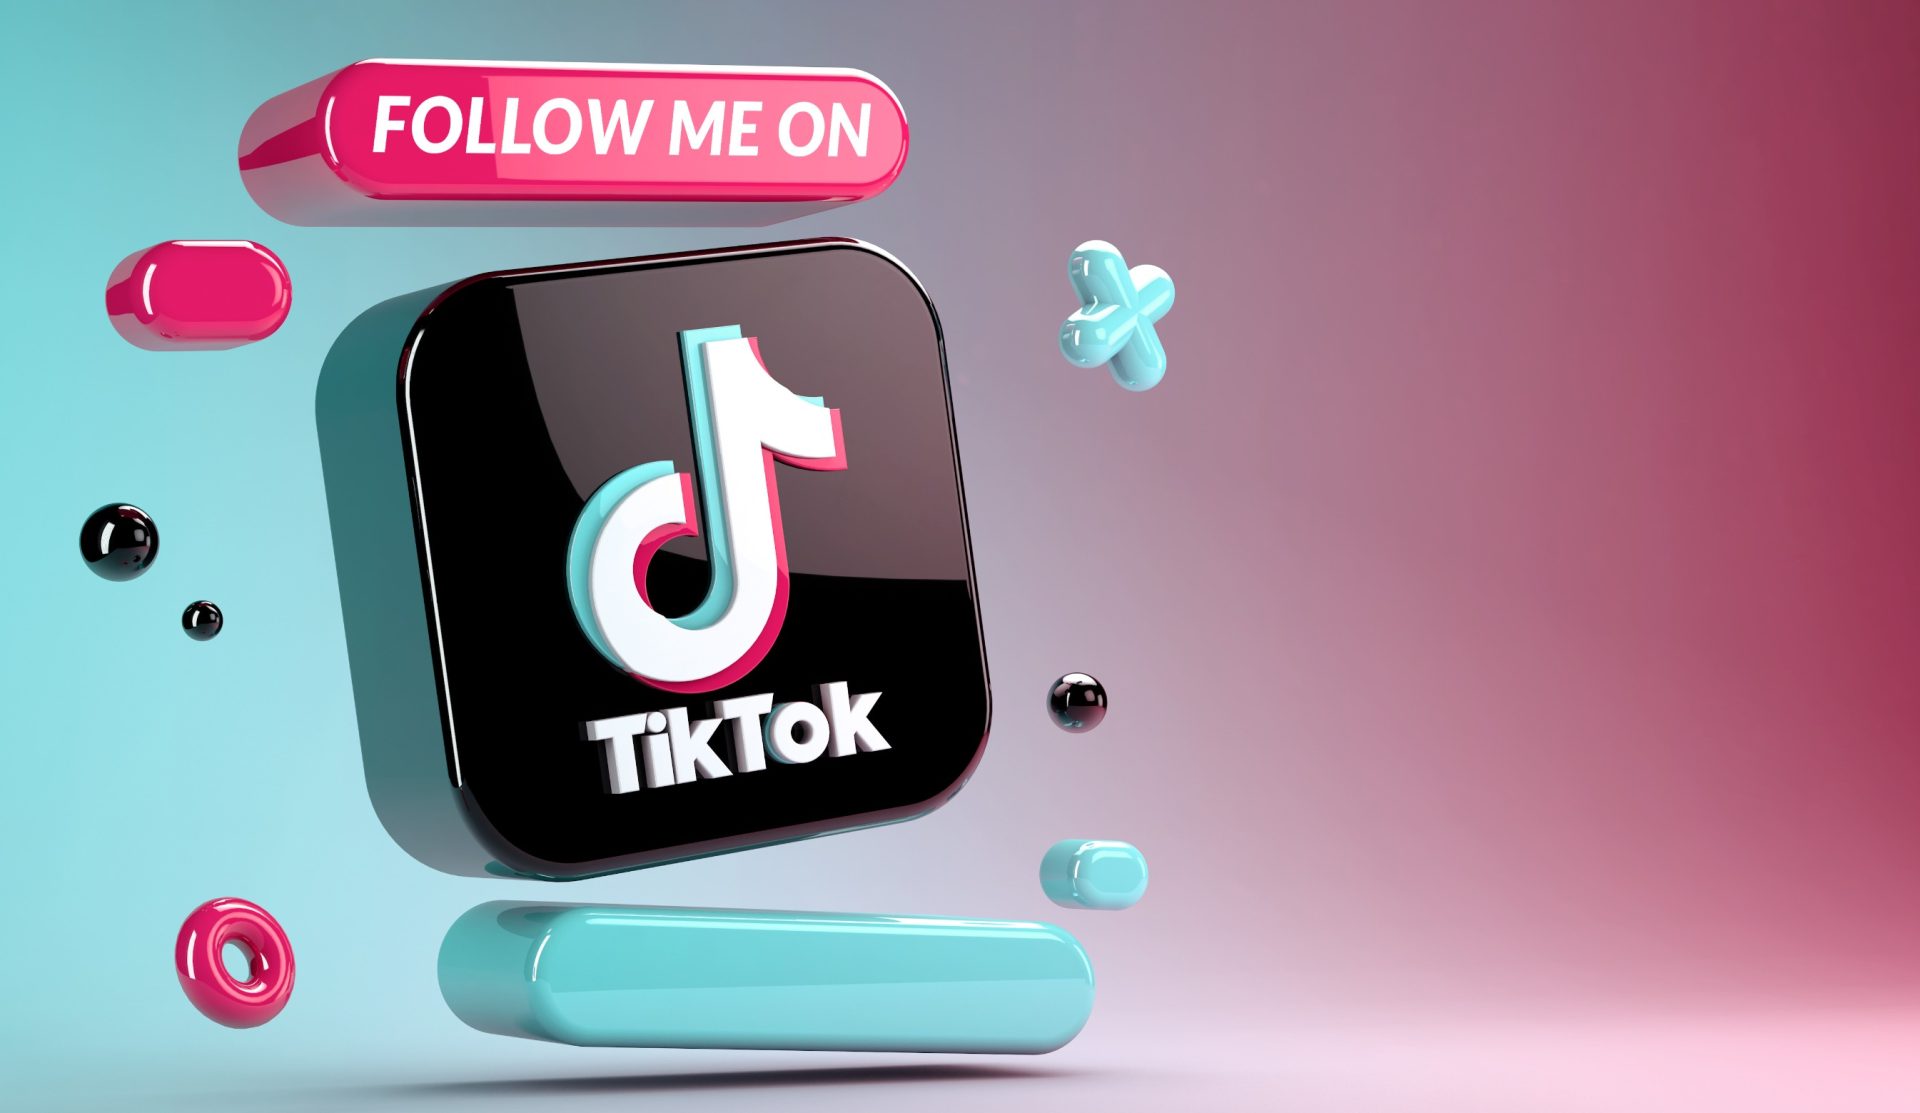 TikTok or IG Reels: What’s The Best Option For Food Brands. - Thought ...